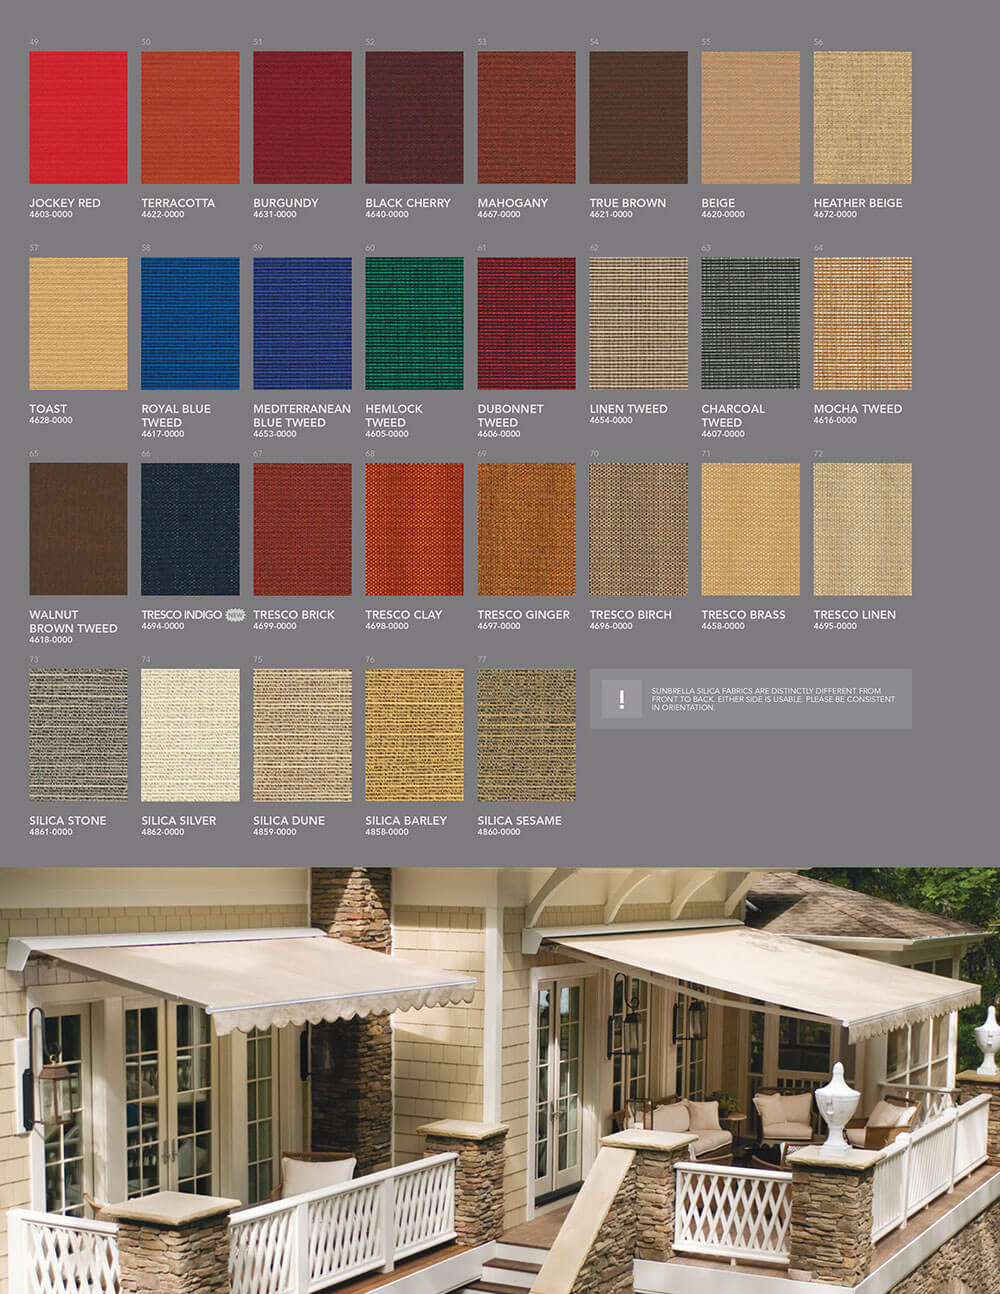 Selection Of Fabric Options With A Shot Of An Outdoor Living Space And Awning